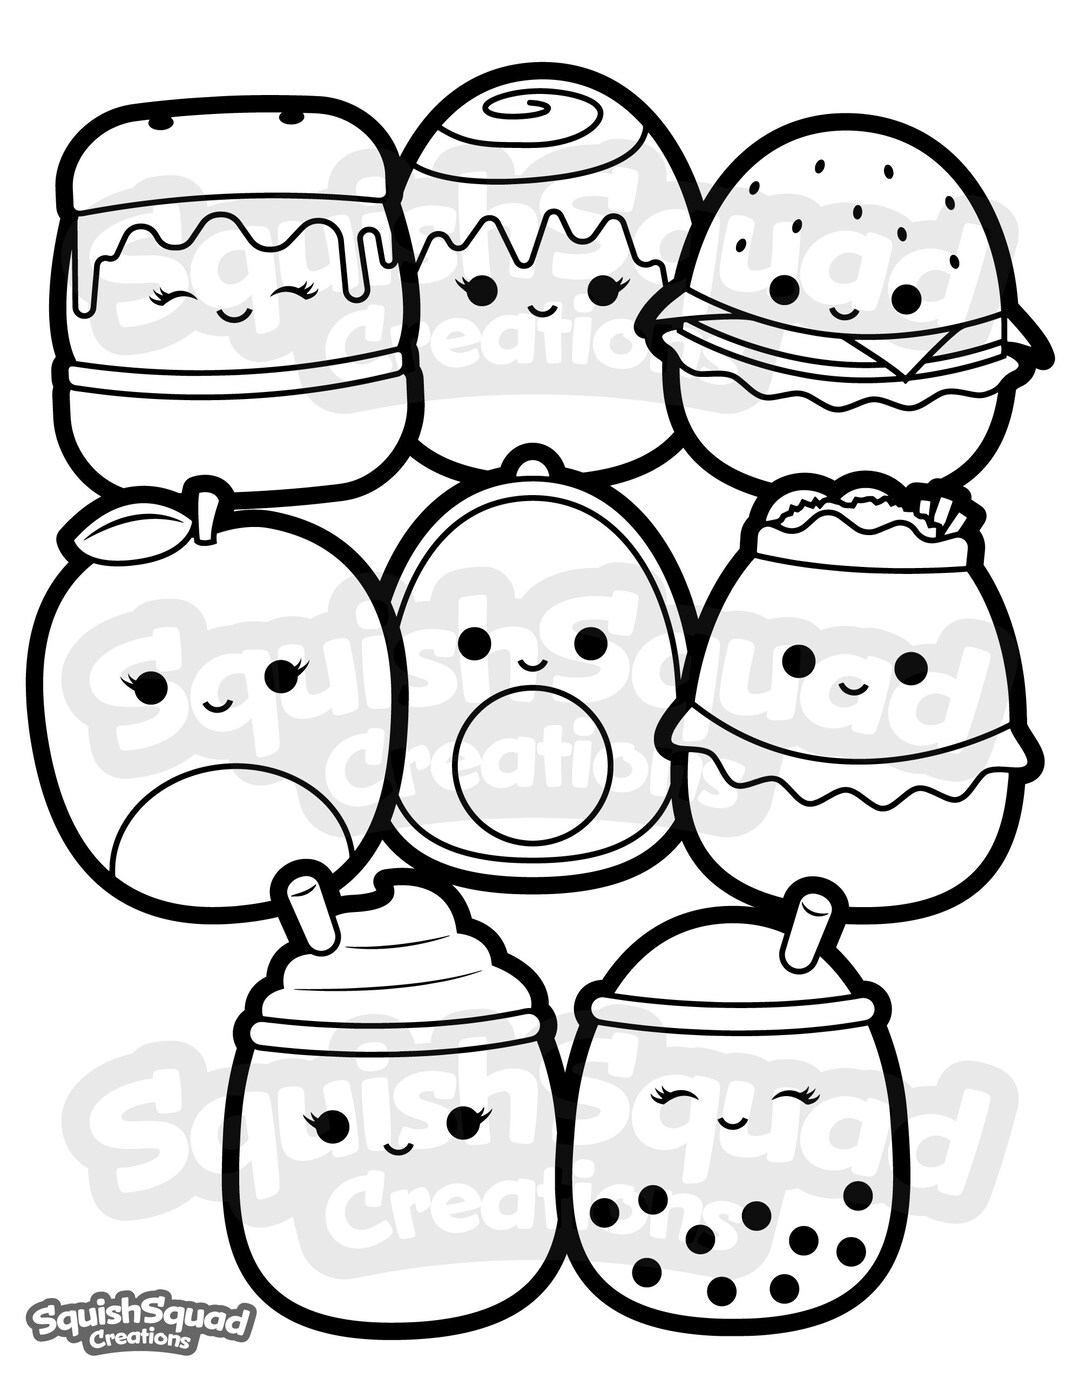 Squishmallow Coloring Page Printable Squishmallow Coloring Page Squishmallow Downloadable